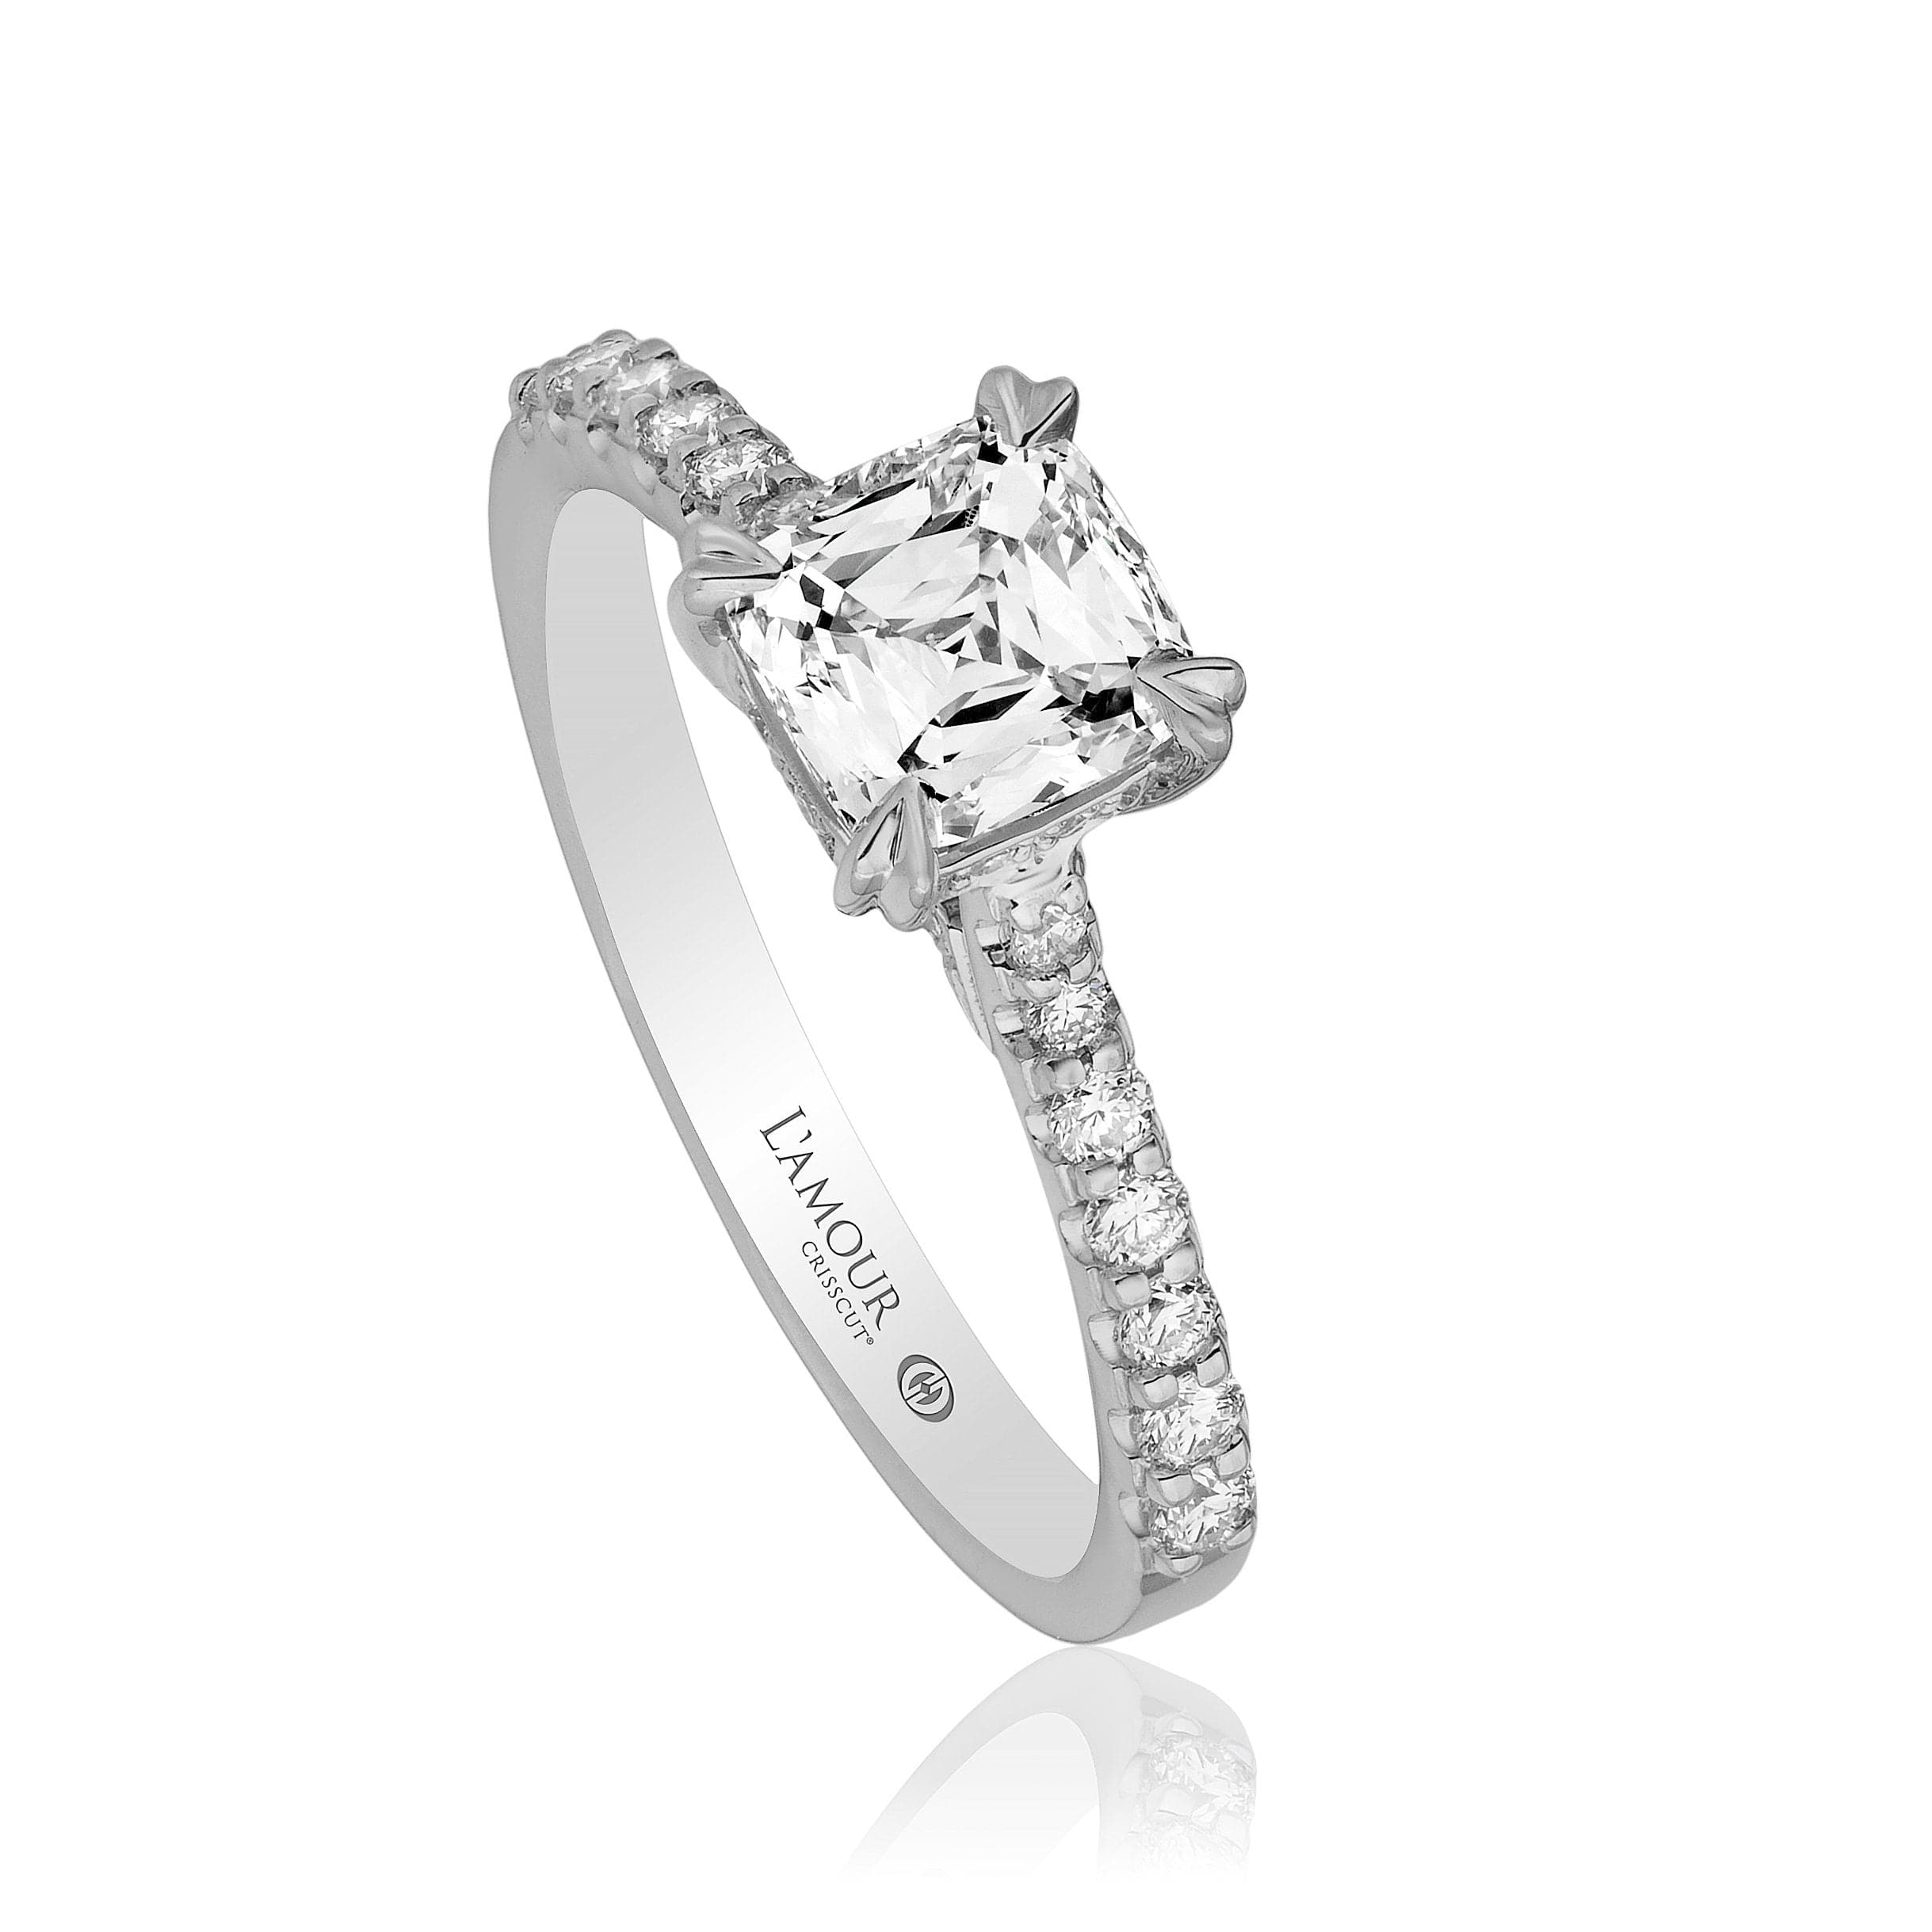 Christopher Designs Bridal Engagement Ring Christopher Designs Platinum Crisscut Cushion Cut 1.07cts Solitaire with Diamond Band Engagement Ring 6.5